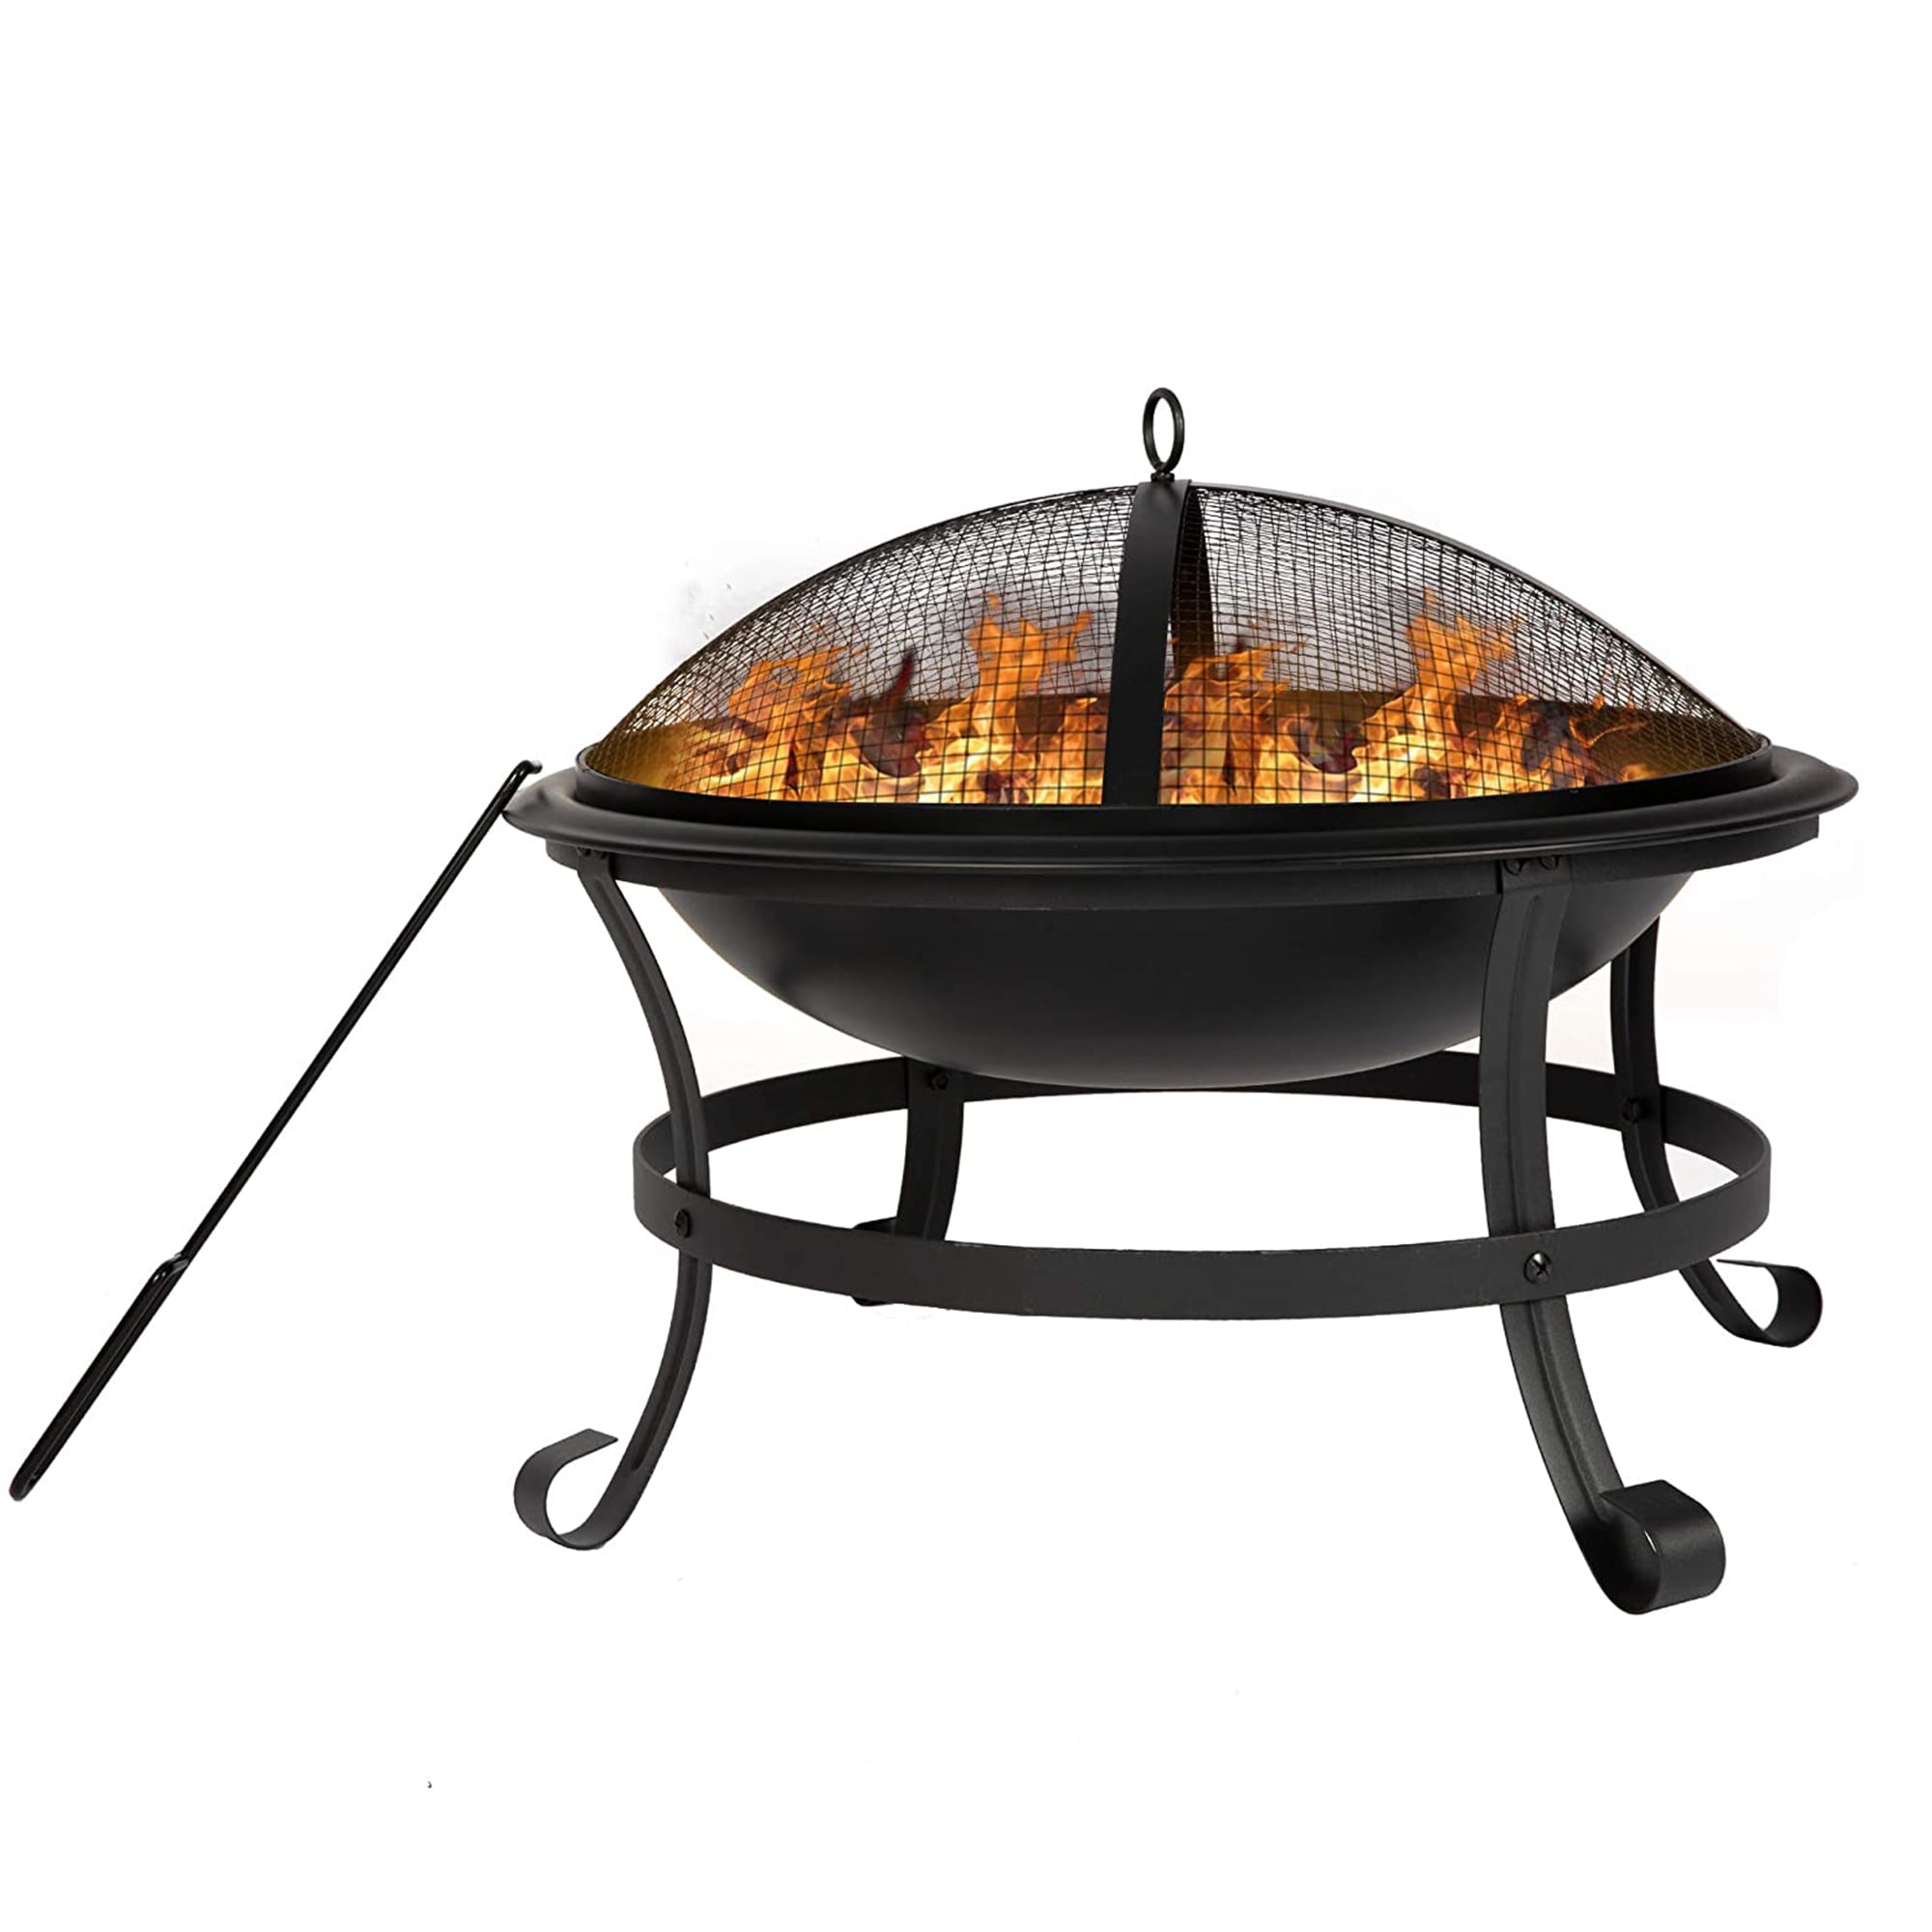 28" Portable Steel Fire Pit Mobile Spark Guard Screen Door Outdoor Fireplace 